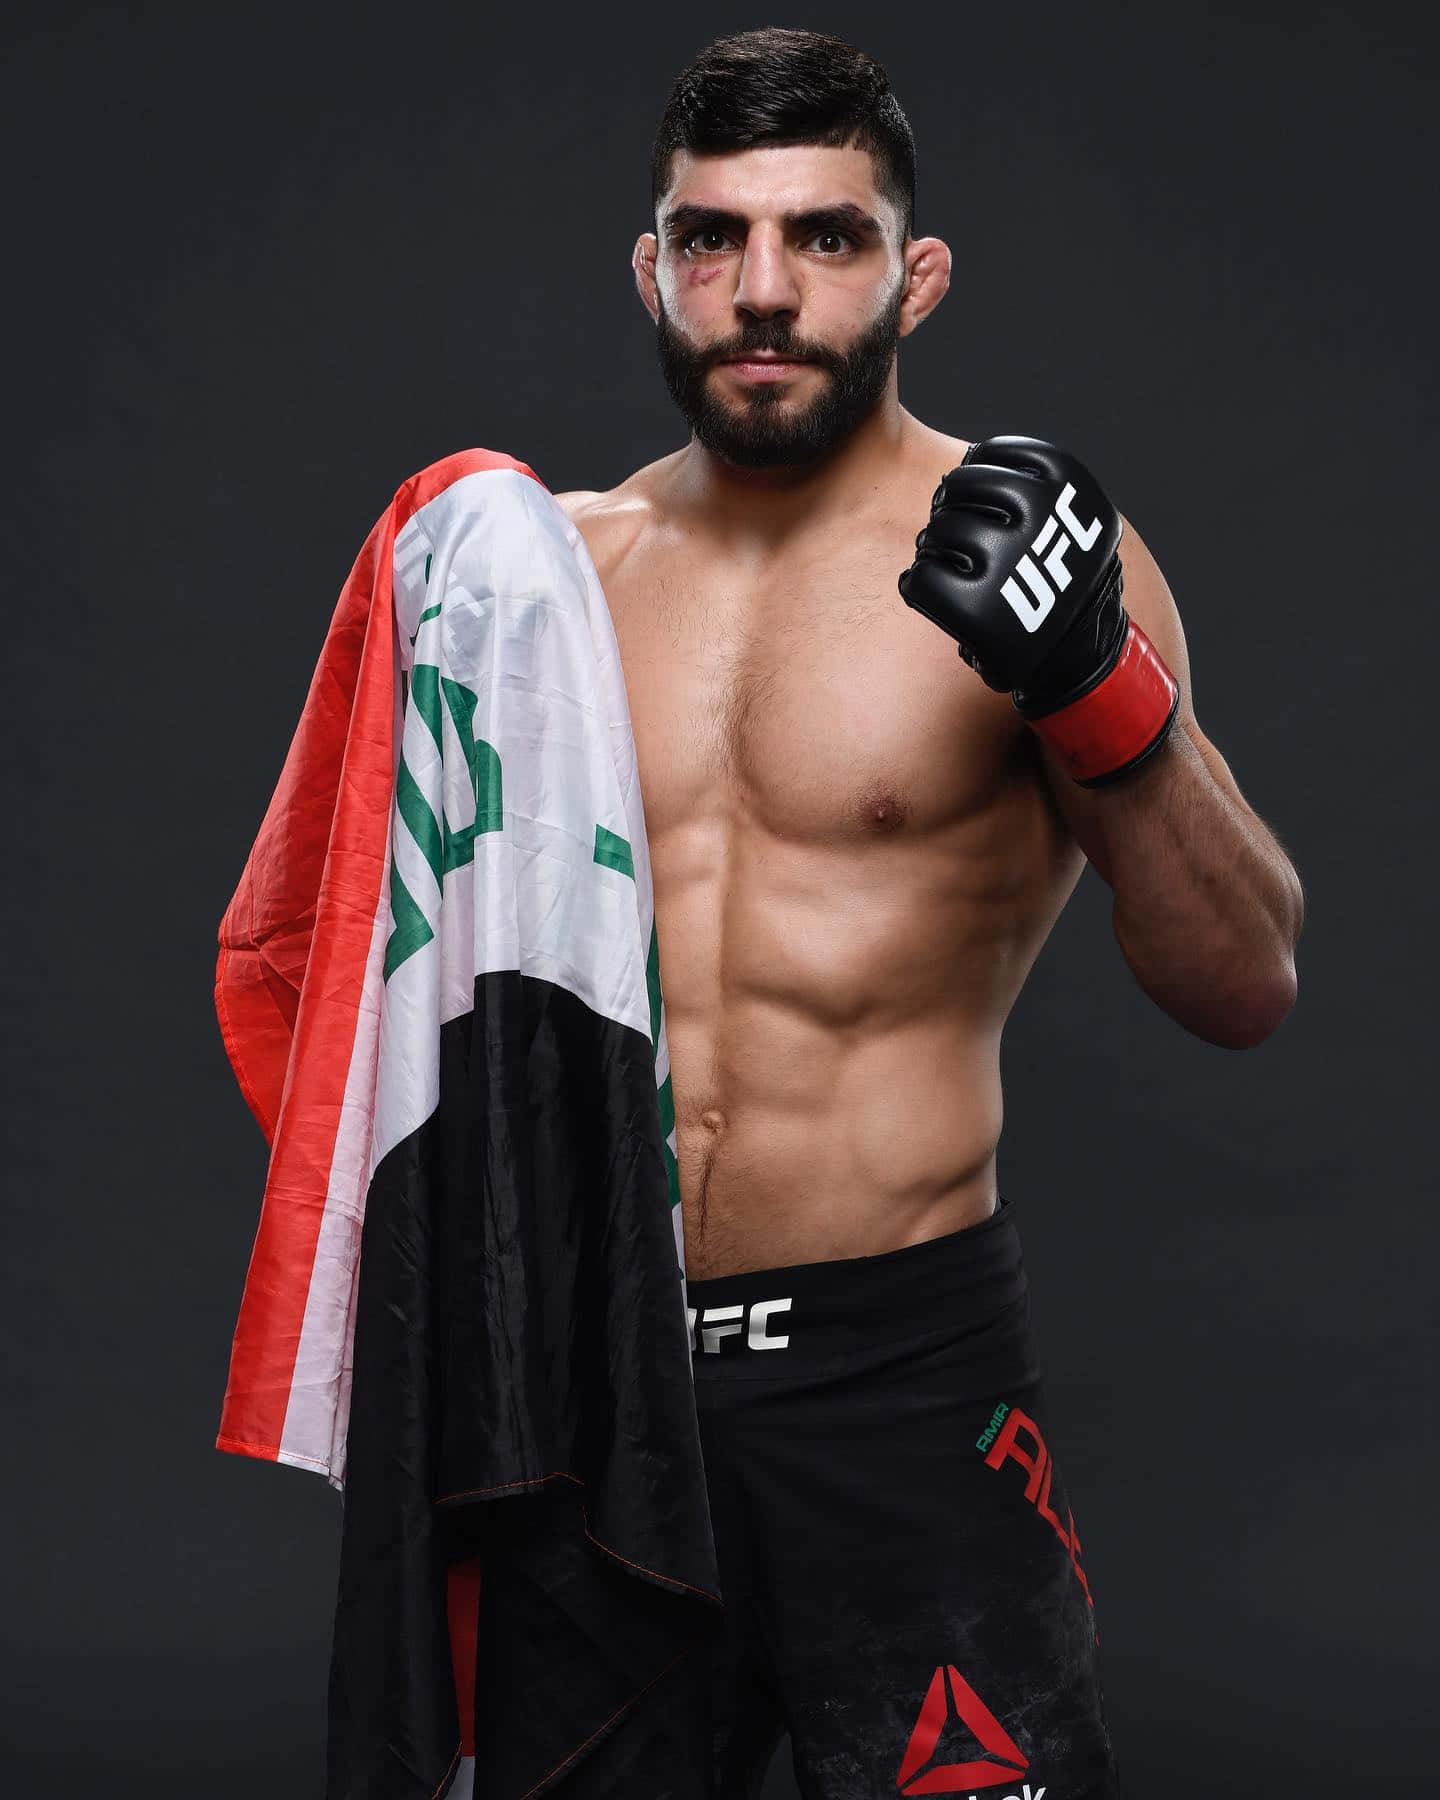 Amir Albazi Celebrating Victory with Fist Raised and Flag Wallpaper